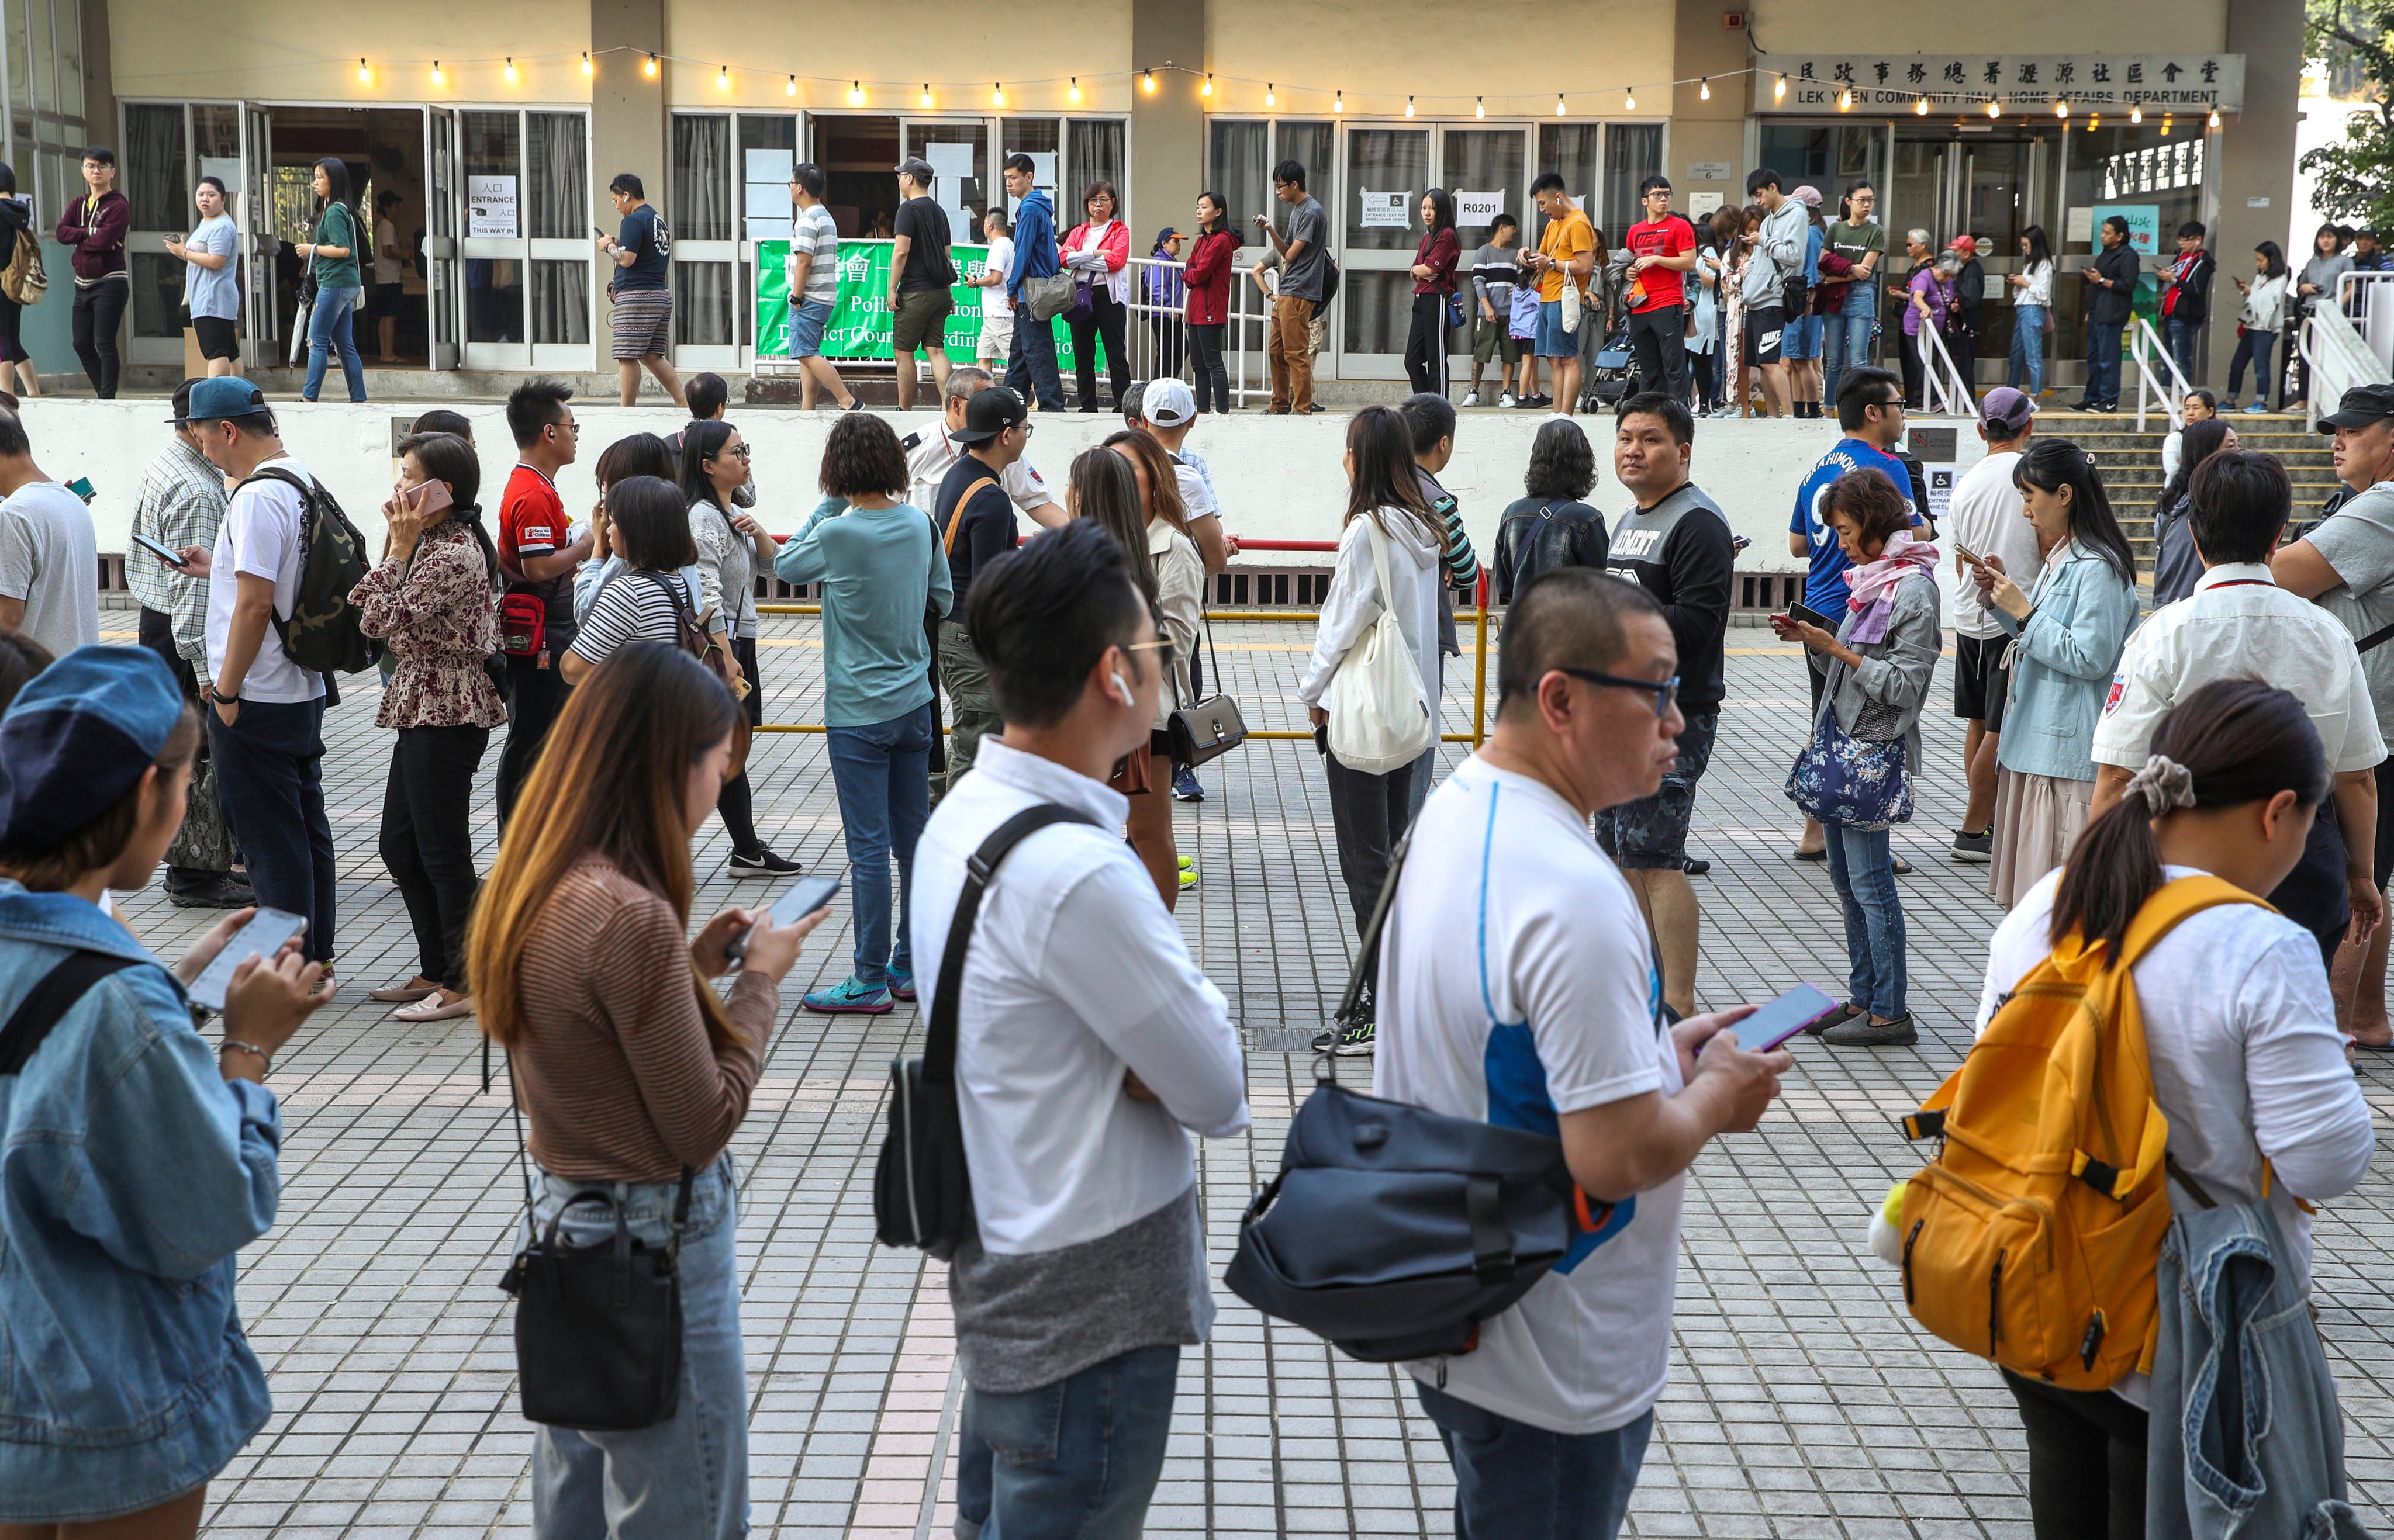 People at a polling station in 2019. Ex-chief executive Leung Chun-ying says the voter base of radical protesters is still sizeable. Photo: Winson Wong